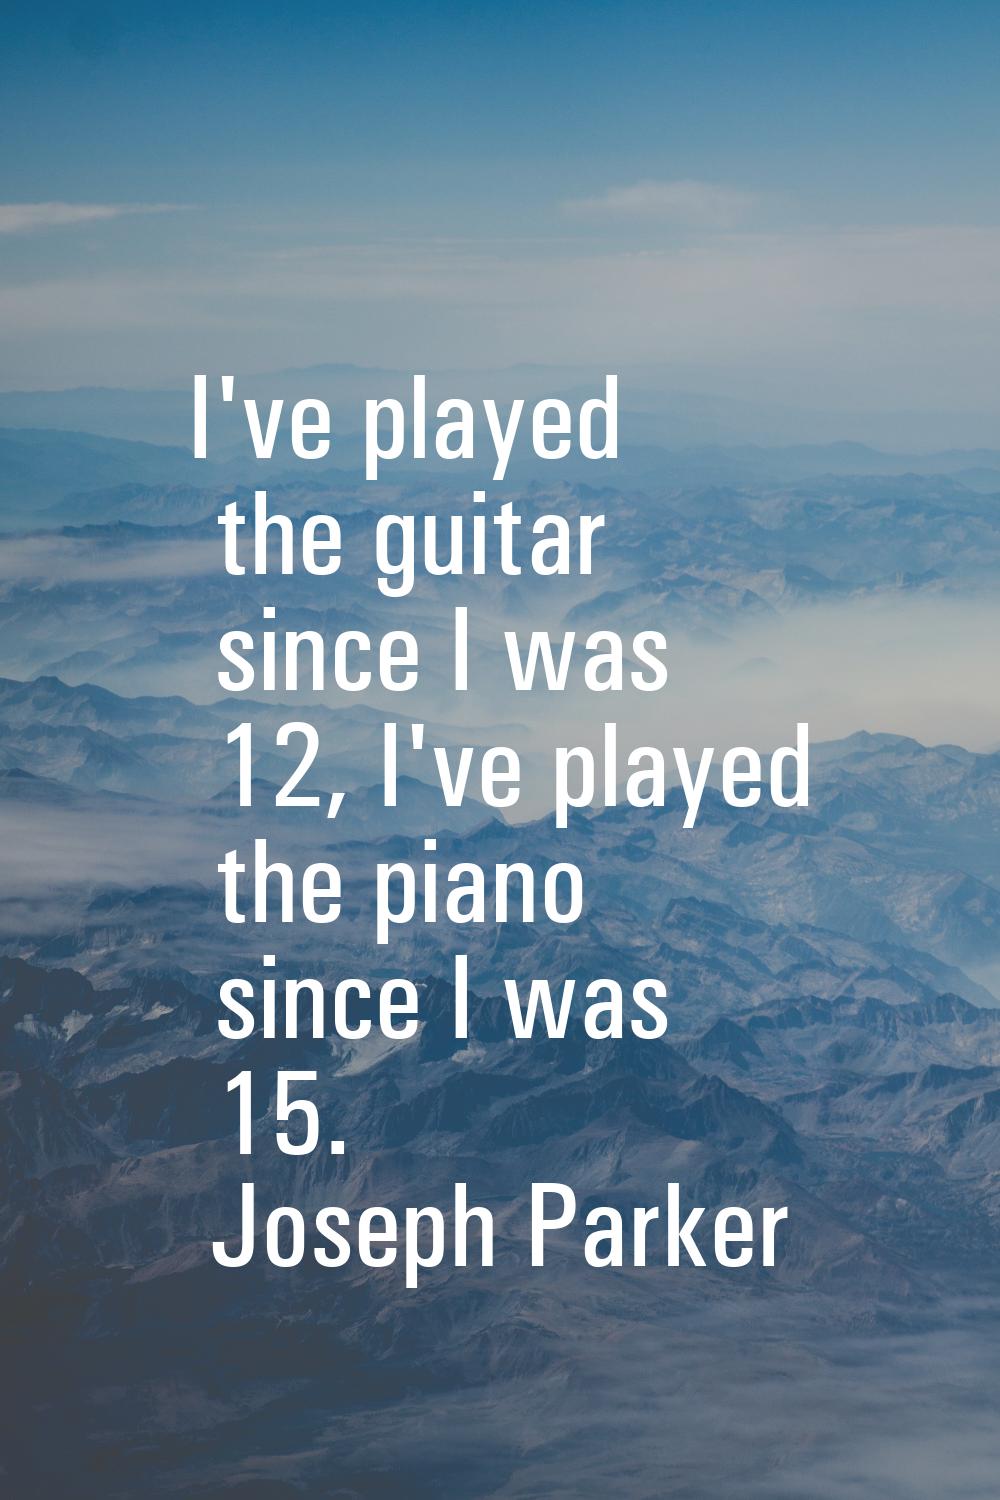 I've played the guitar since I was 12, I've played the piano since I was 15.